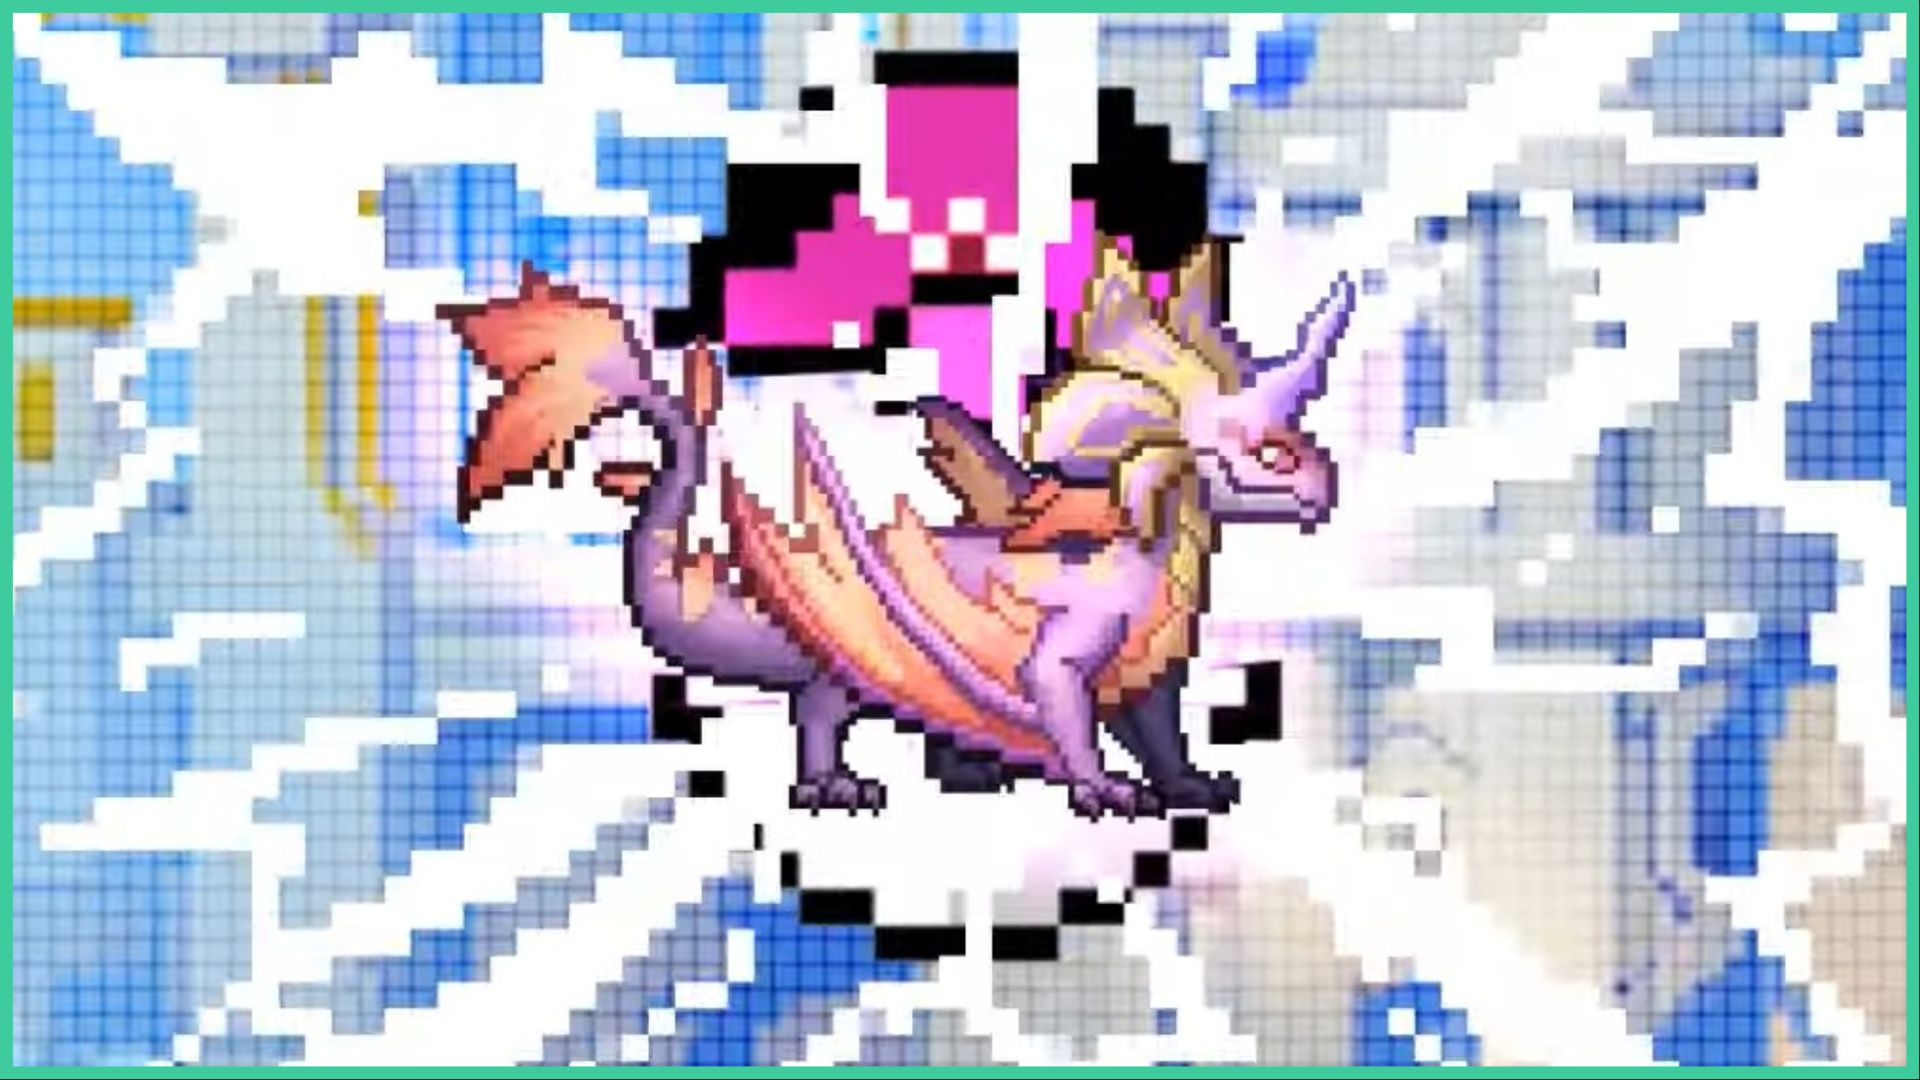 feature image for our zero to hero pixel saga tier list, it's a screenshot from the trailer of the game with a pixelated purple dragon with pastel orange details coming out of an exploding egg